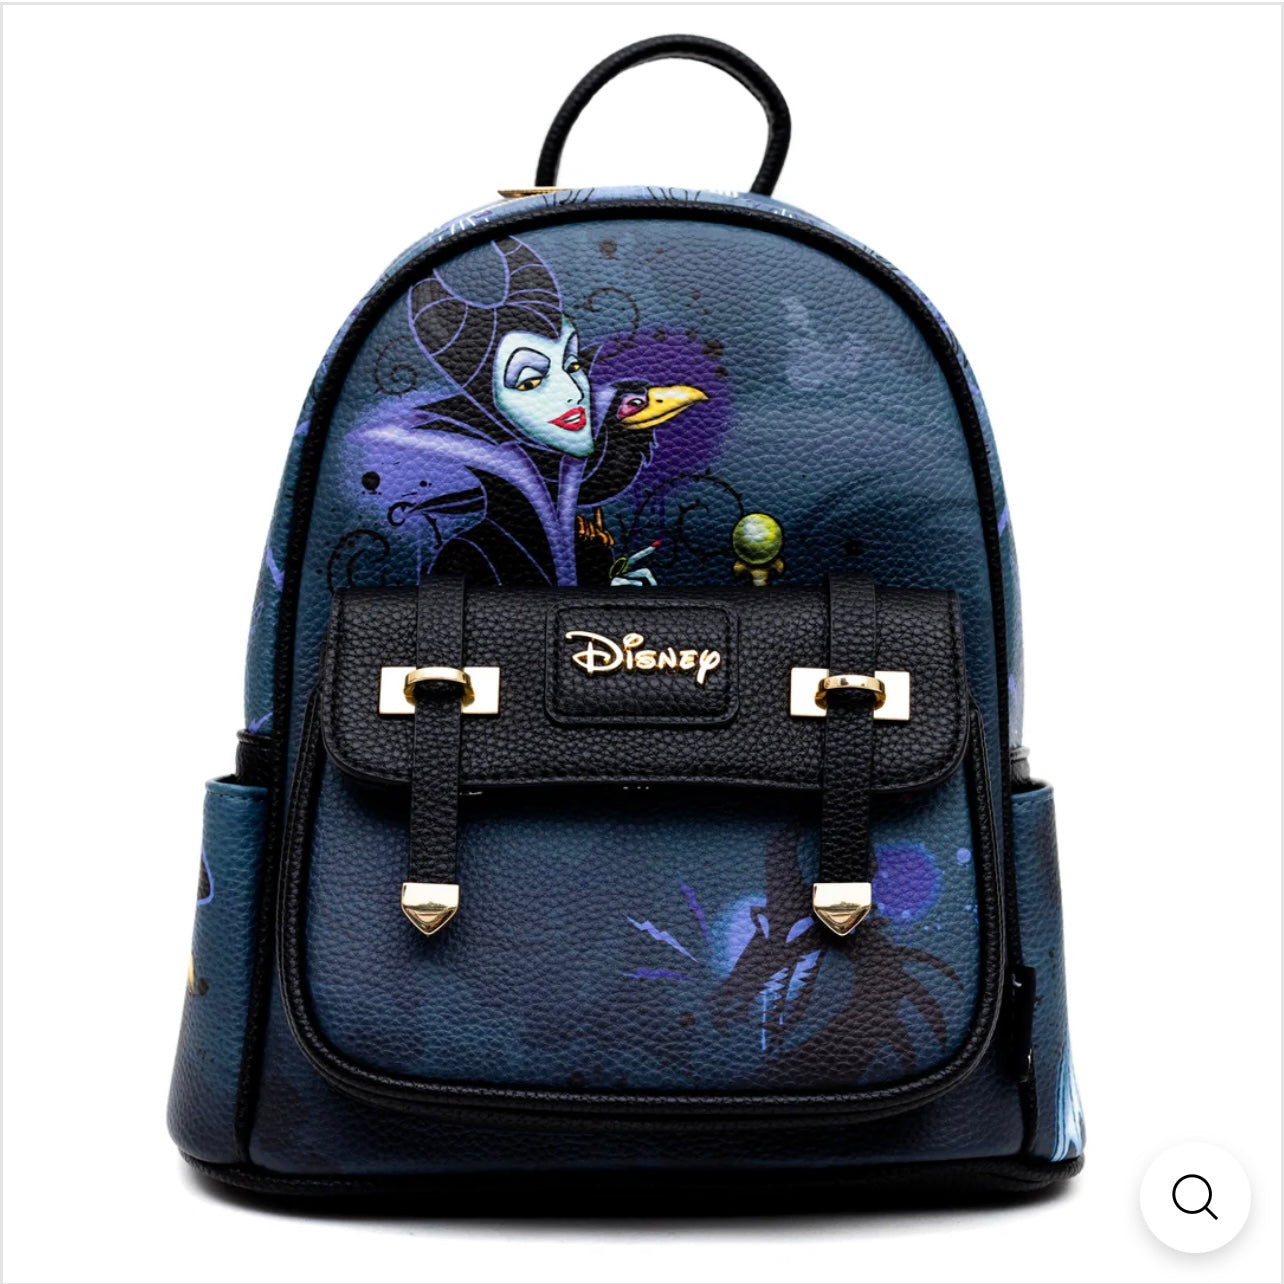 Exclusive Limited Edition- Maleficent Vegan Leather Backpack